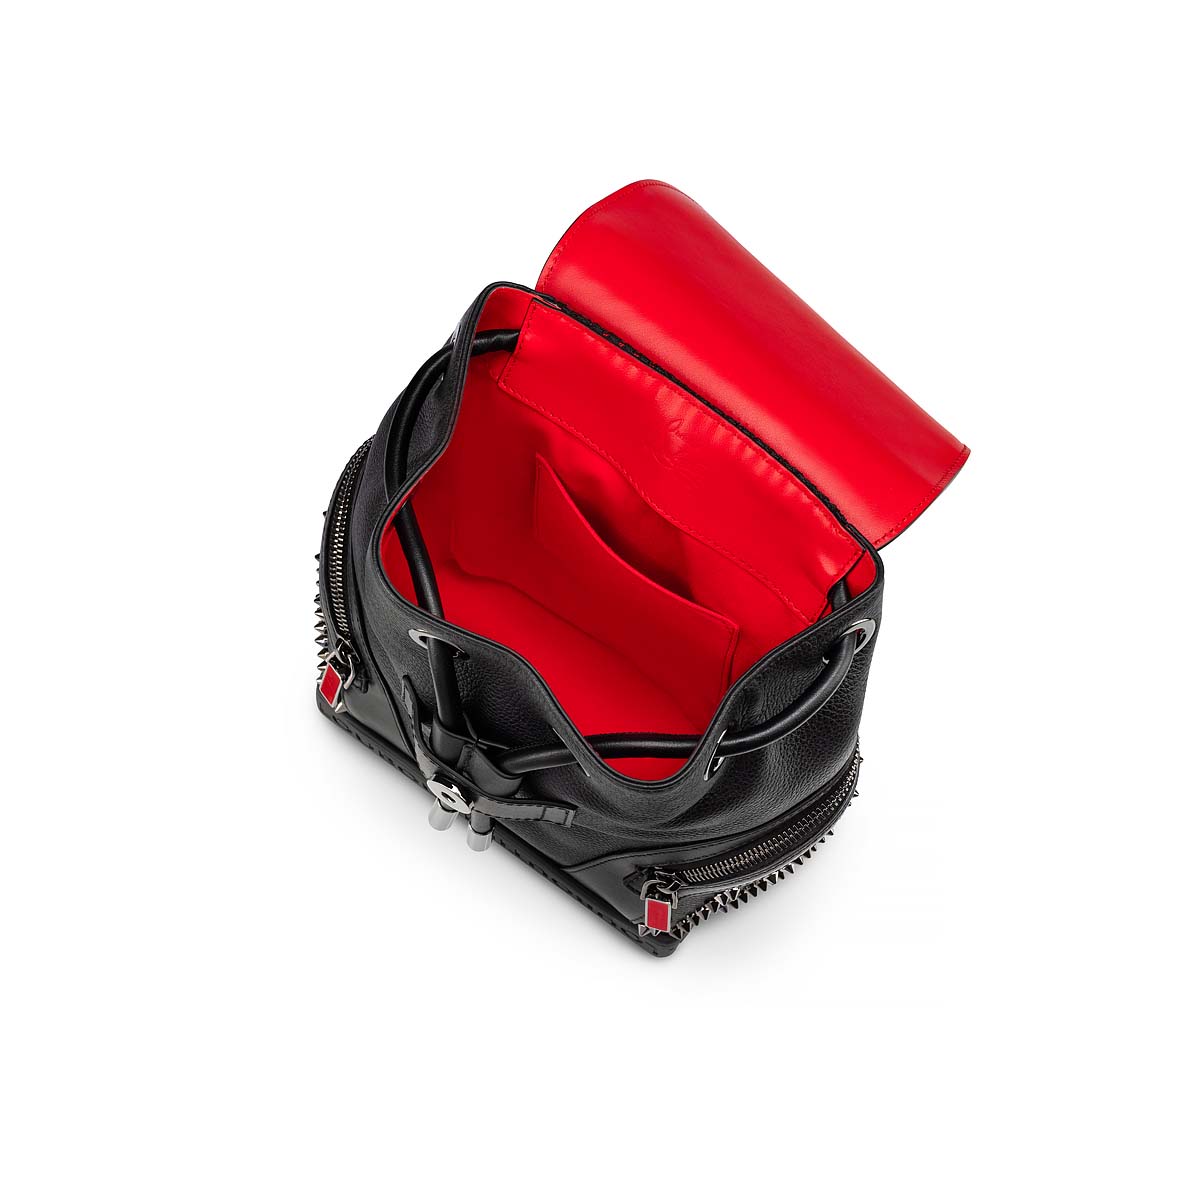 Explorafunk - Backpack - Grained calf leather - Black - Christian Louboutin